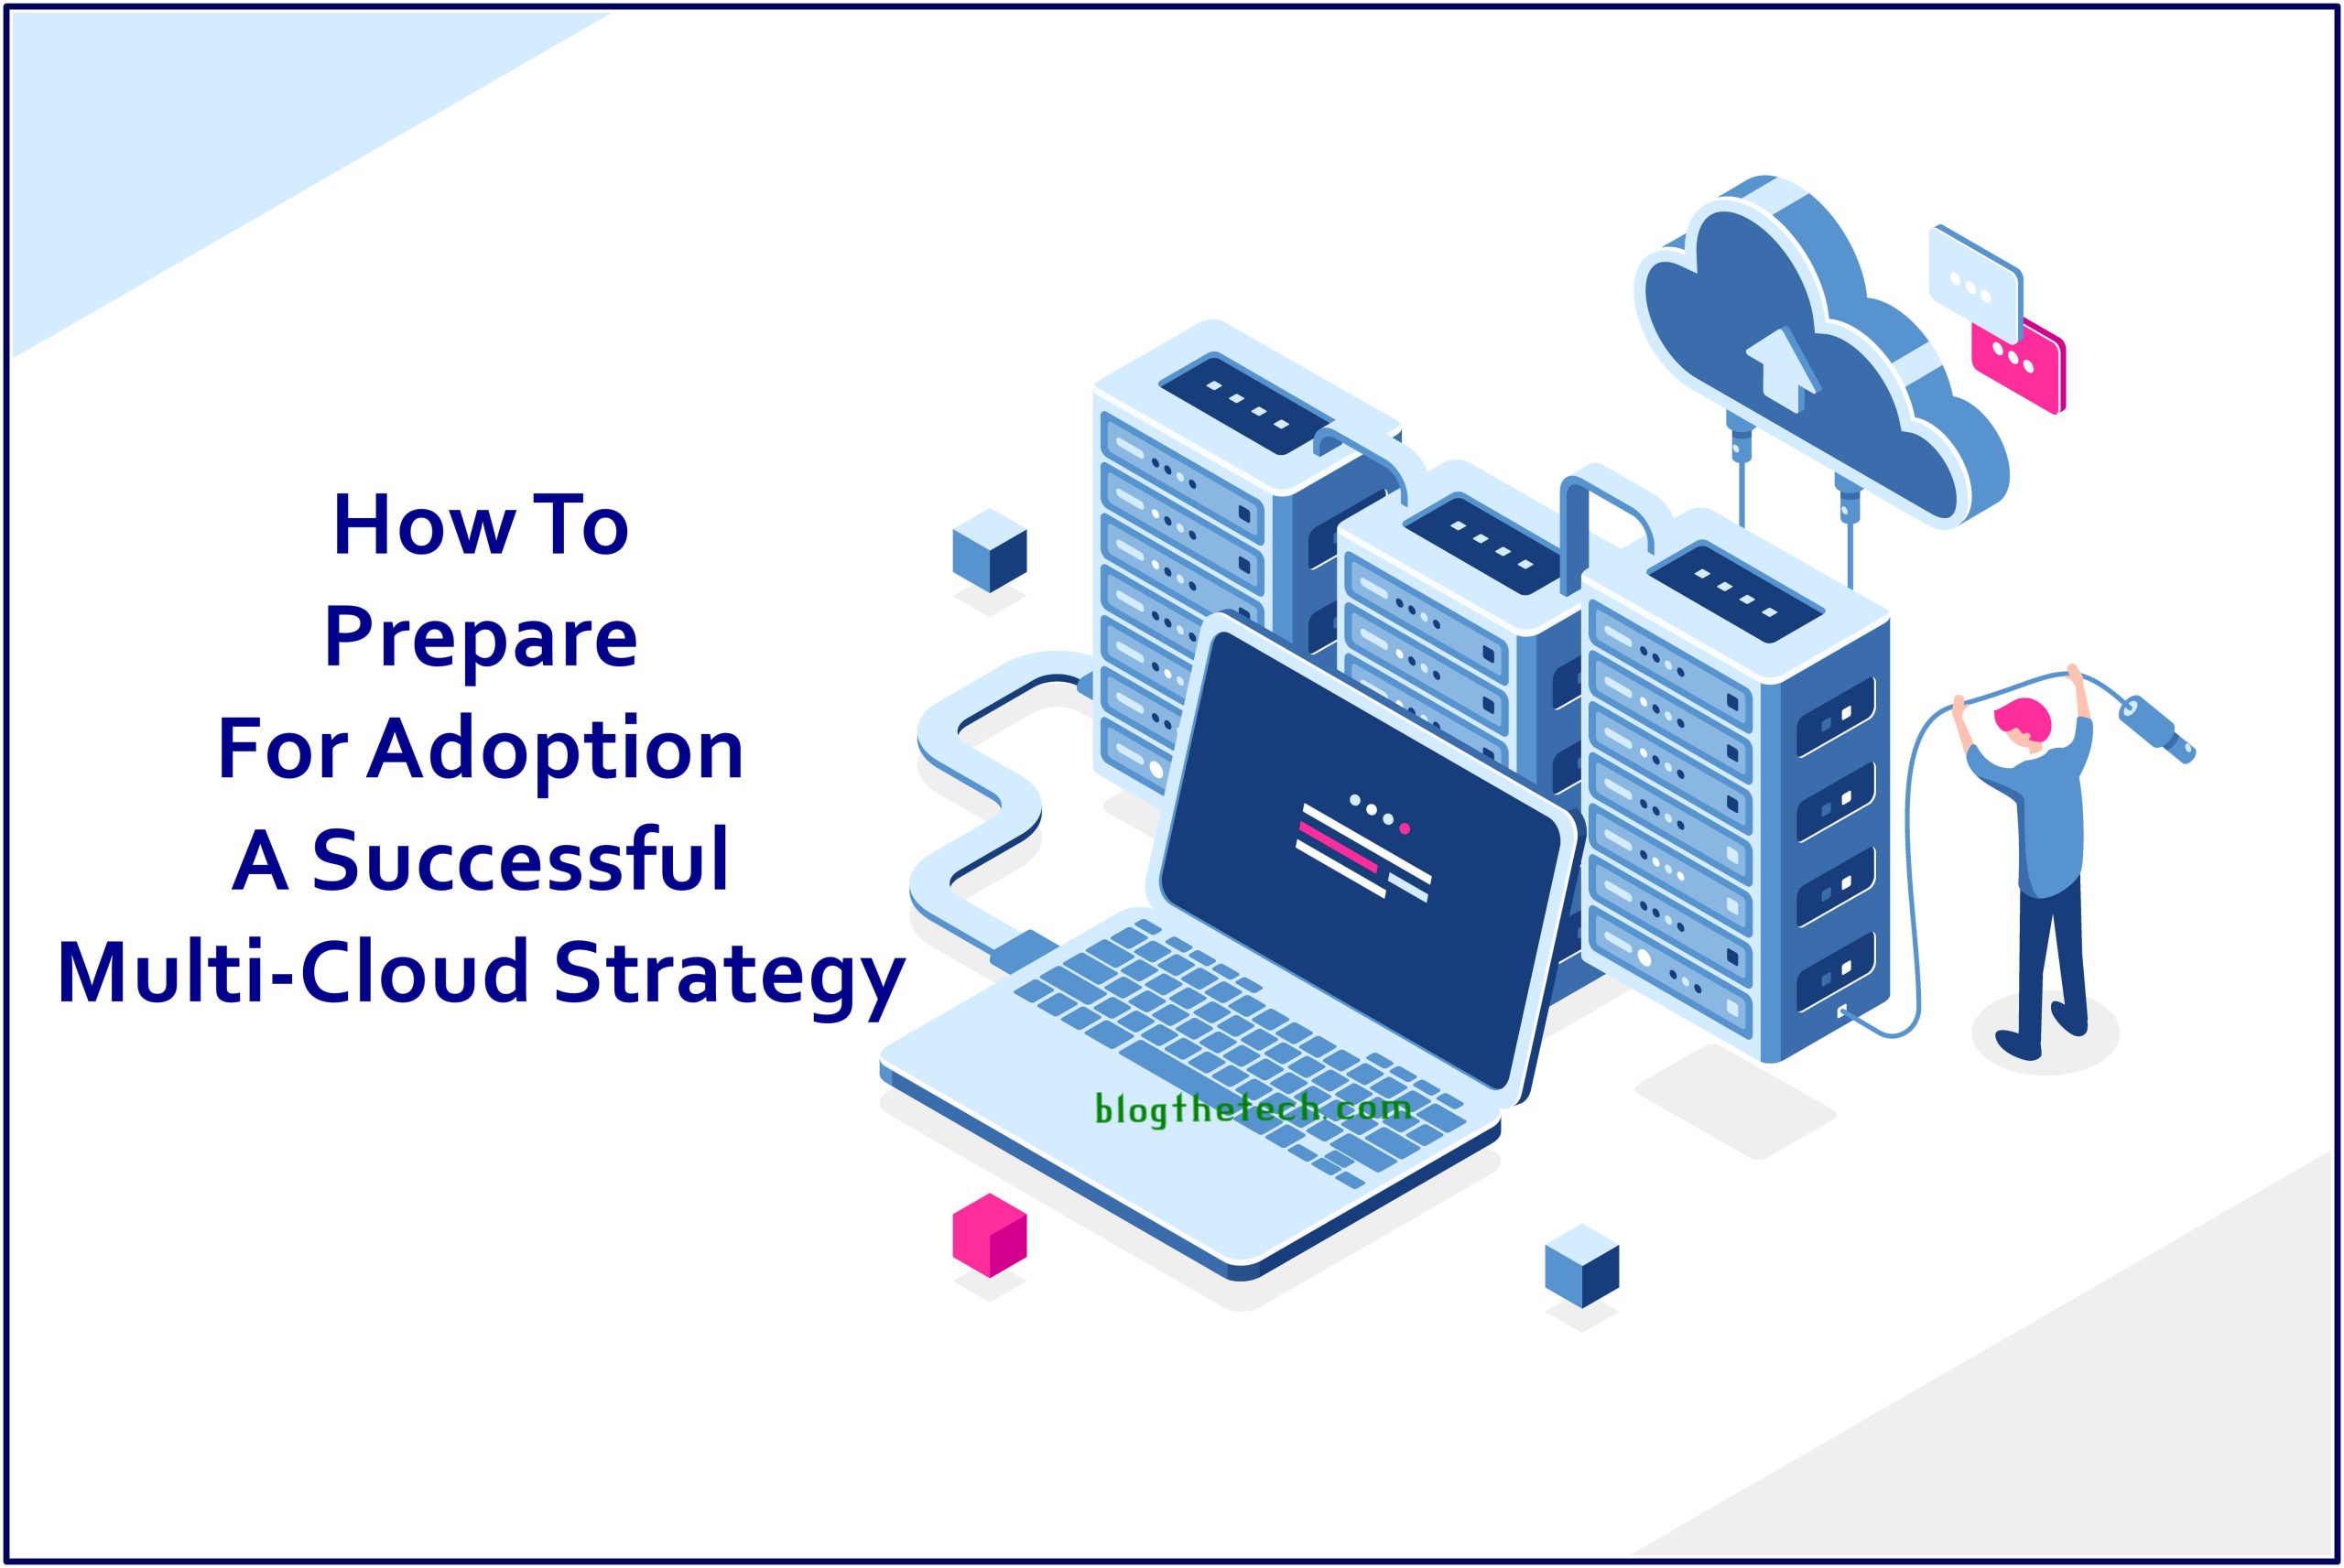 How To Prepare For Adoption A Successful Multi-Cloud Strategy